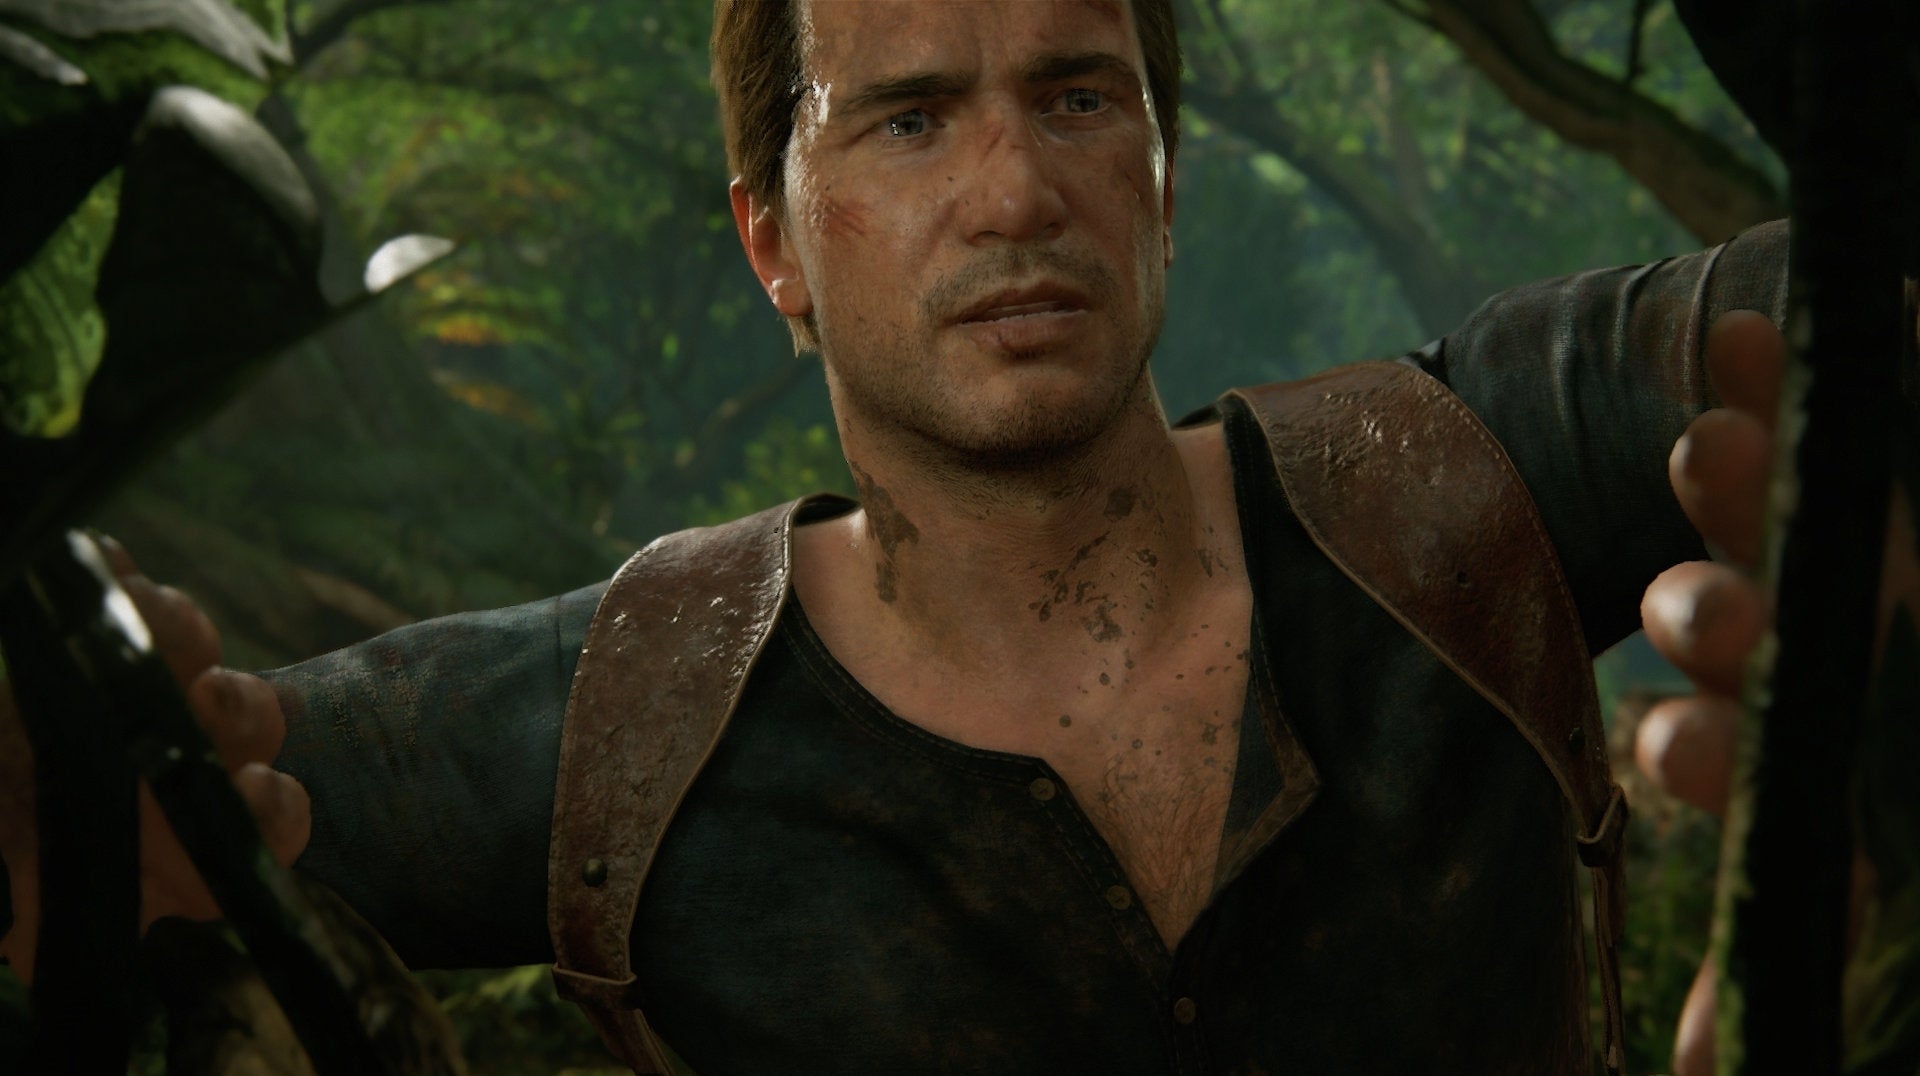 Image for Sony announces Dec 2020 release date for the Uncharted movie